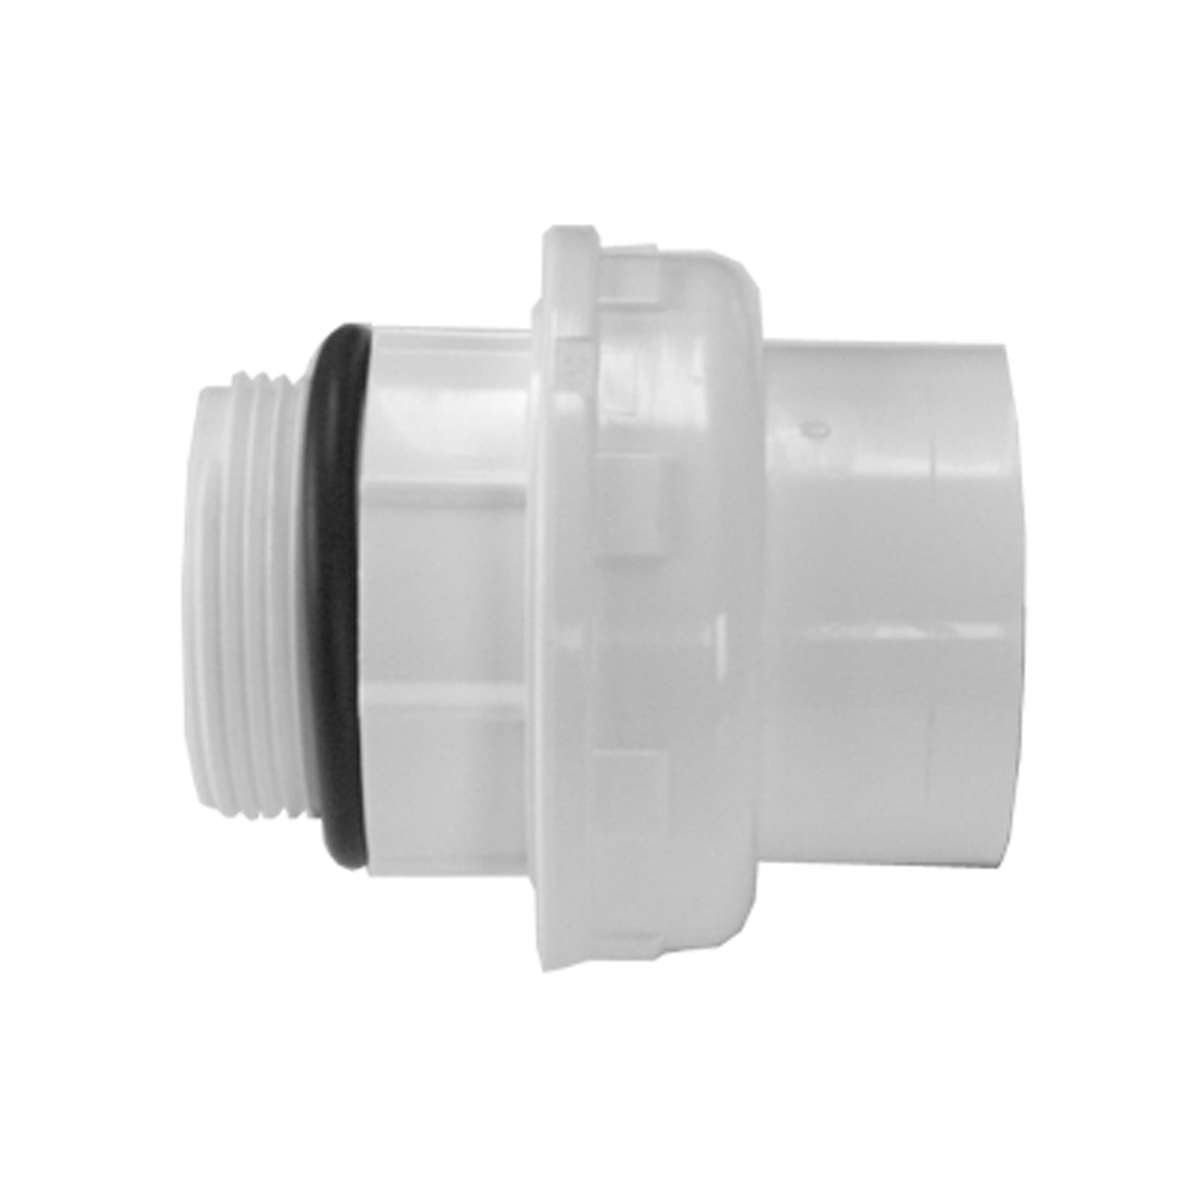 Adapter union extra long PVC white solvent socket d/male thread 90 - 3" EPDM Adapter union extra long PVC white solvent socket d/male thread 90 - 3" EPDM